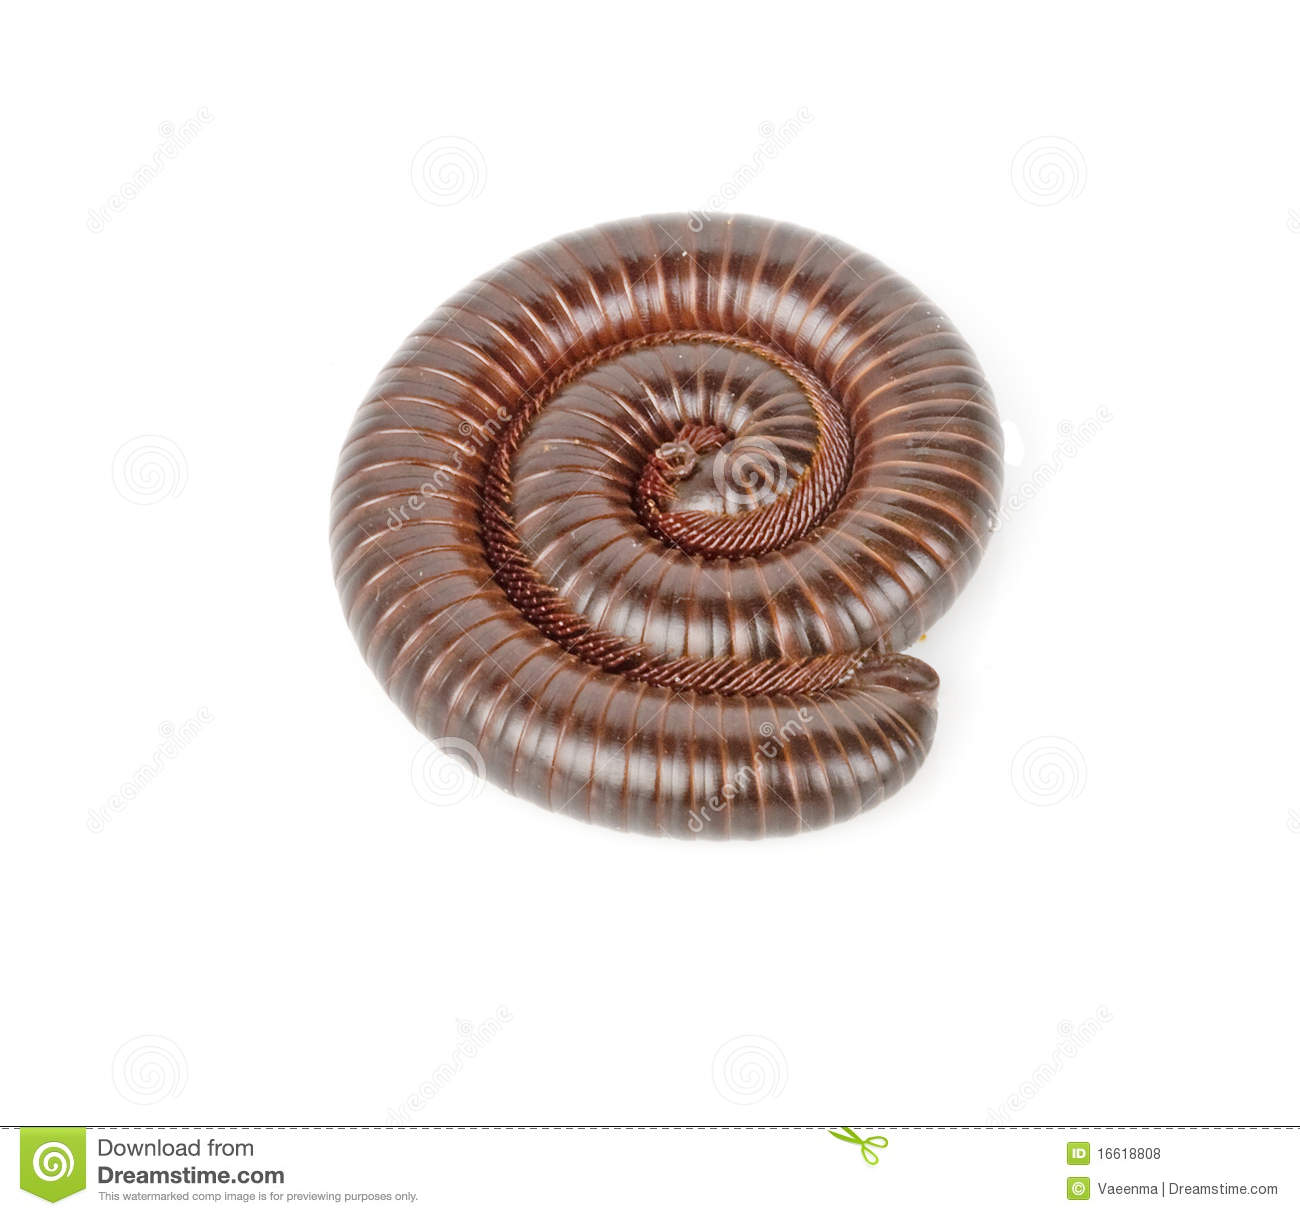 Millipede clipart #6, Download drawings